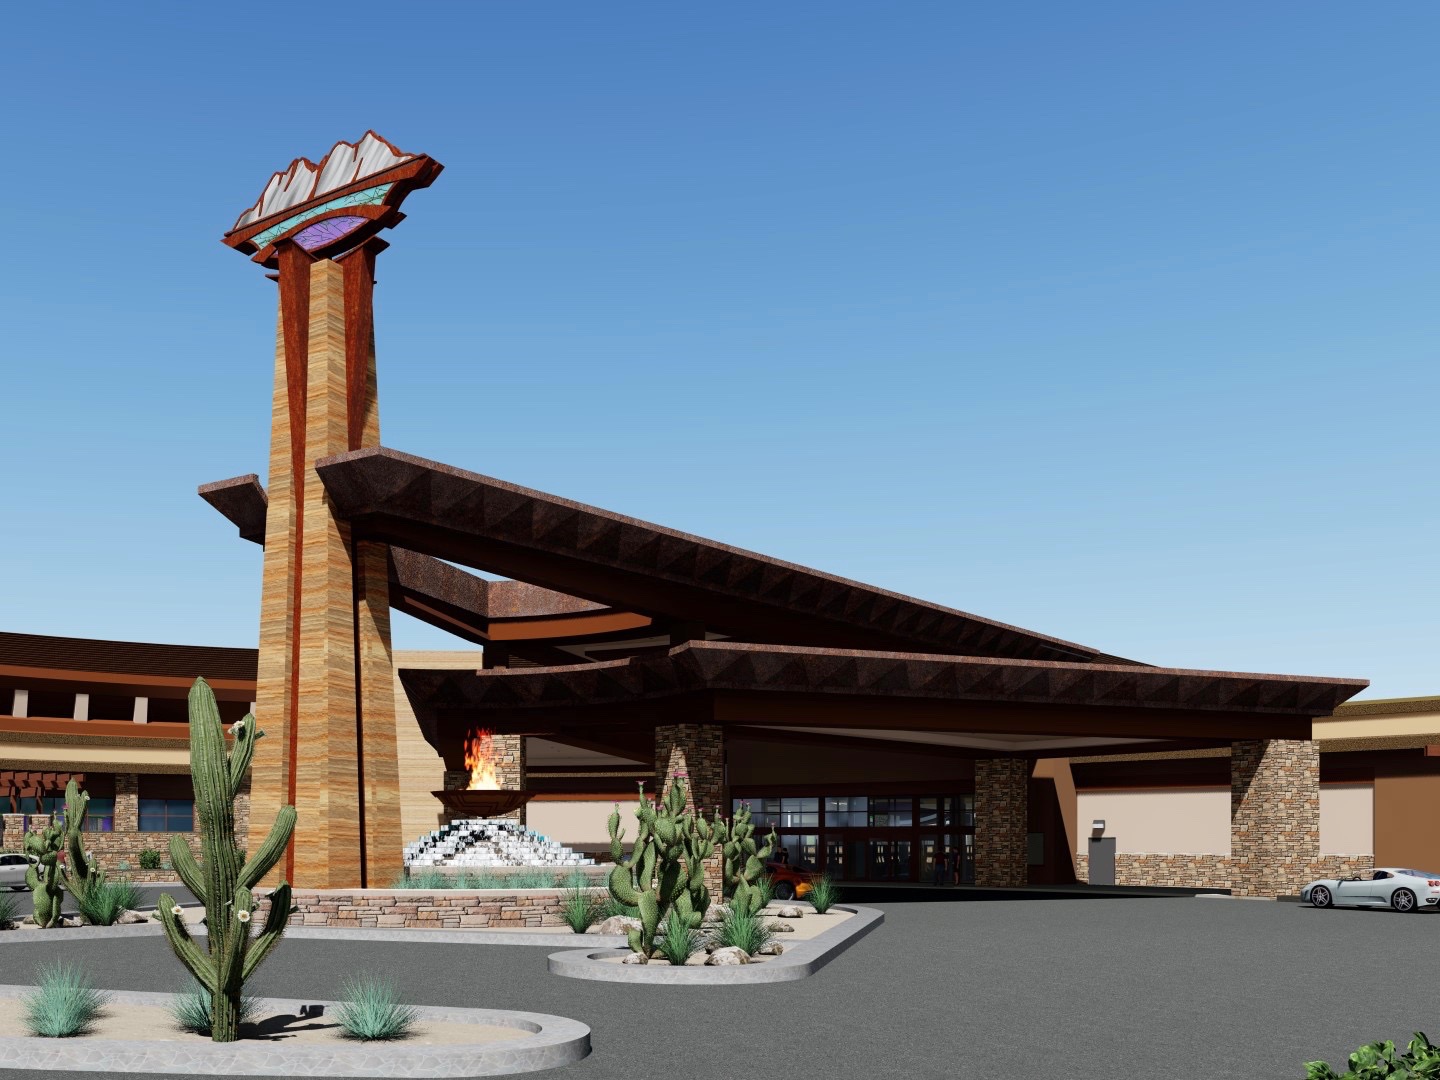 'A new chapter': Fort McDowell Yavapai Nation breaks ground on new casino